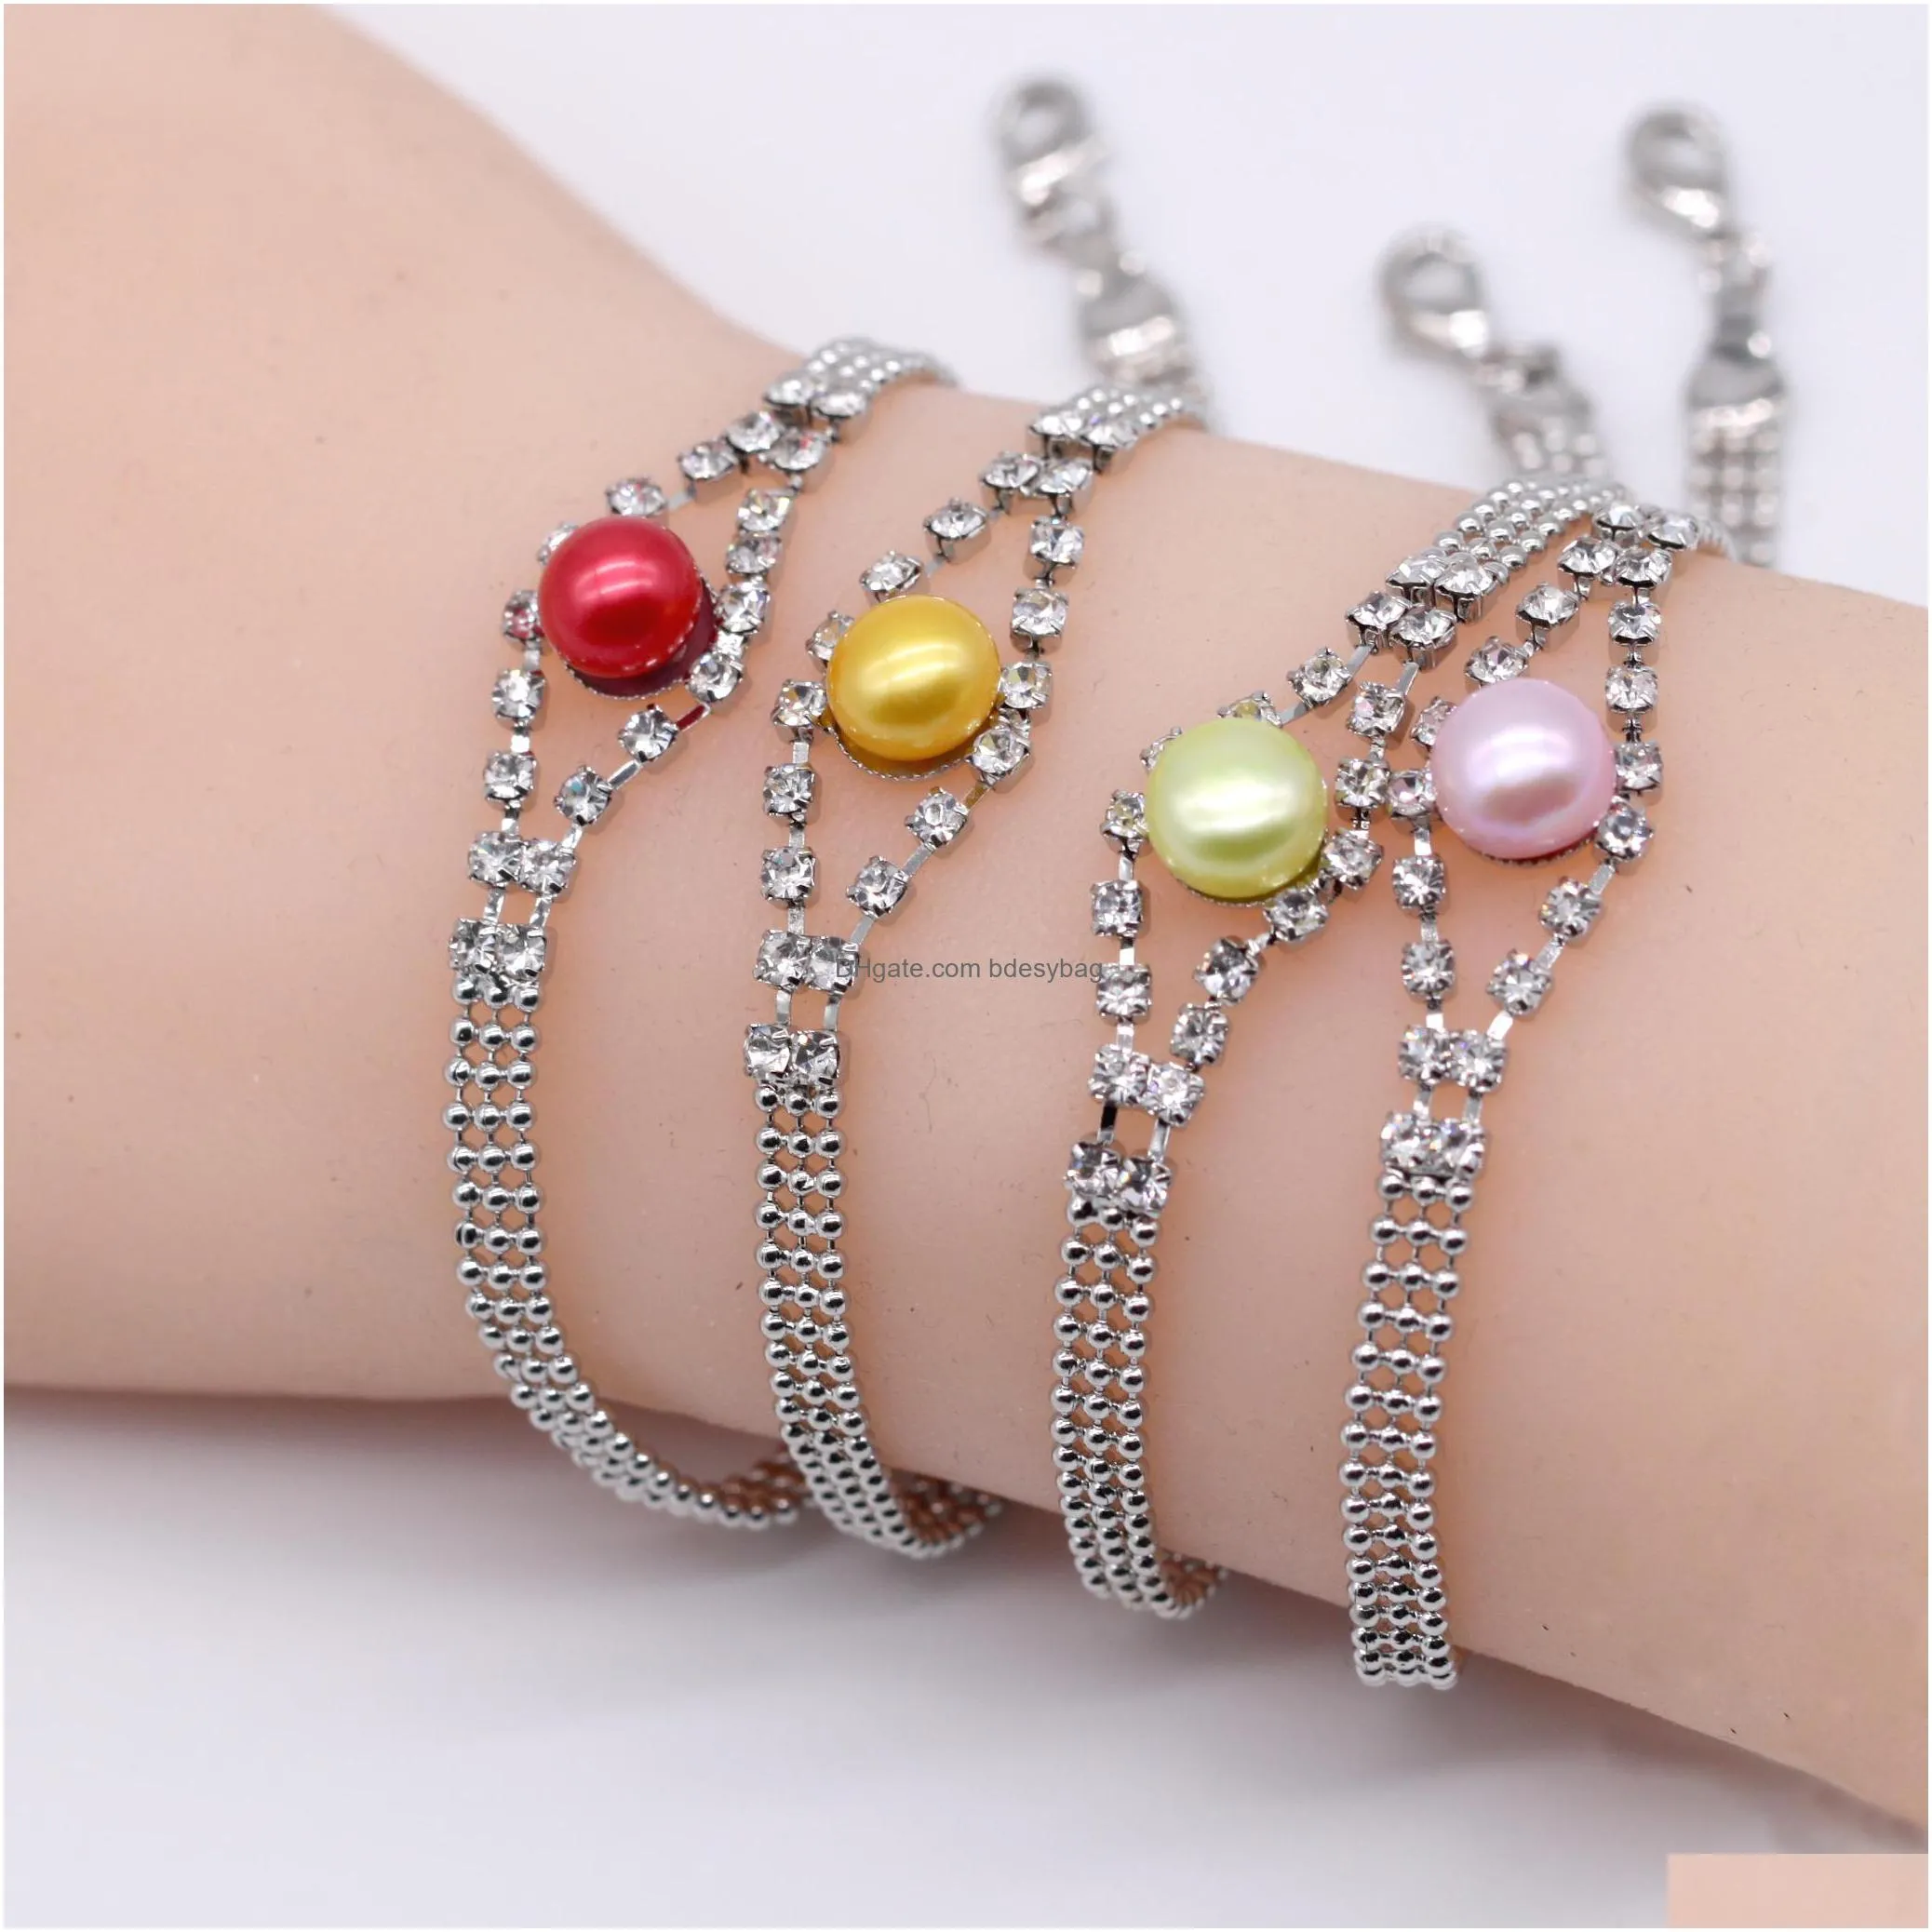 17 colors freshwater pearl beads bracelet natural fashion pearl jewelry adjustable bracelet charms womens gift love wish pearl